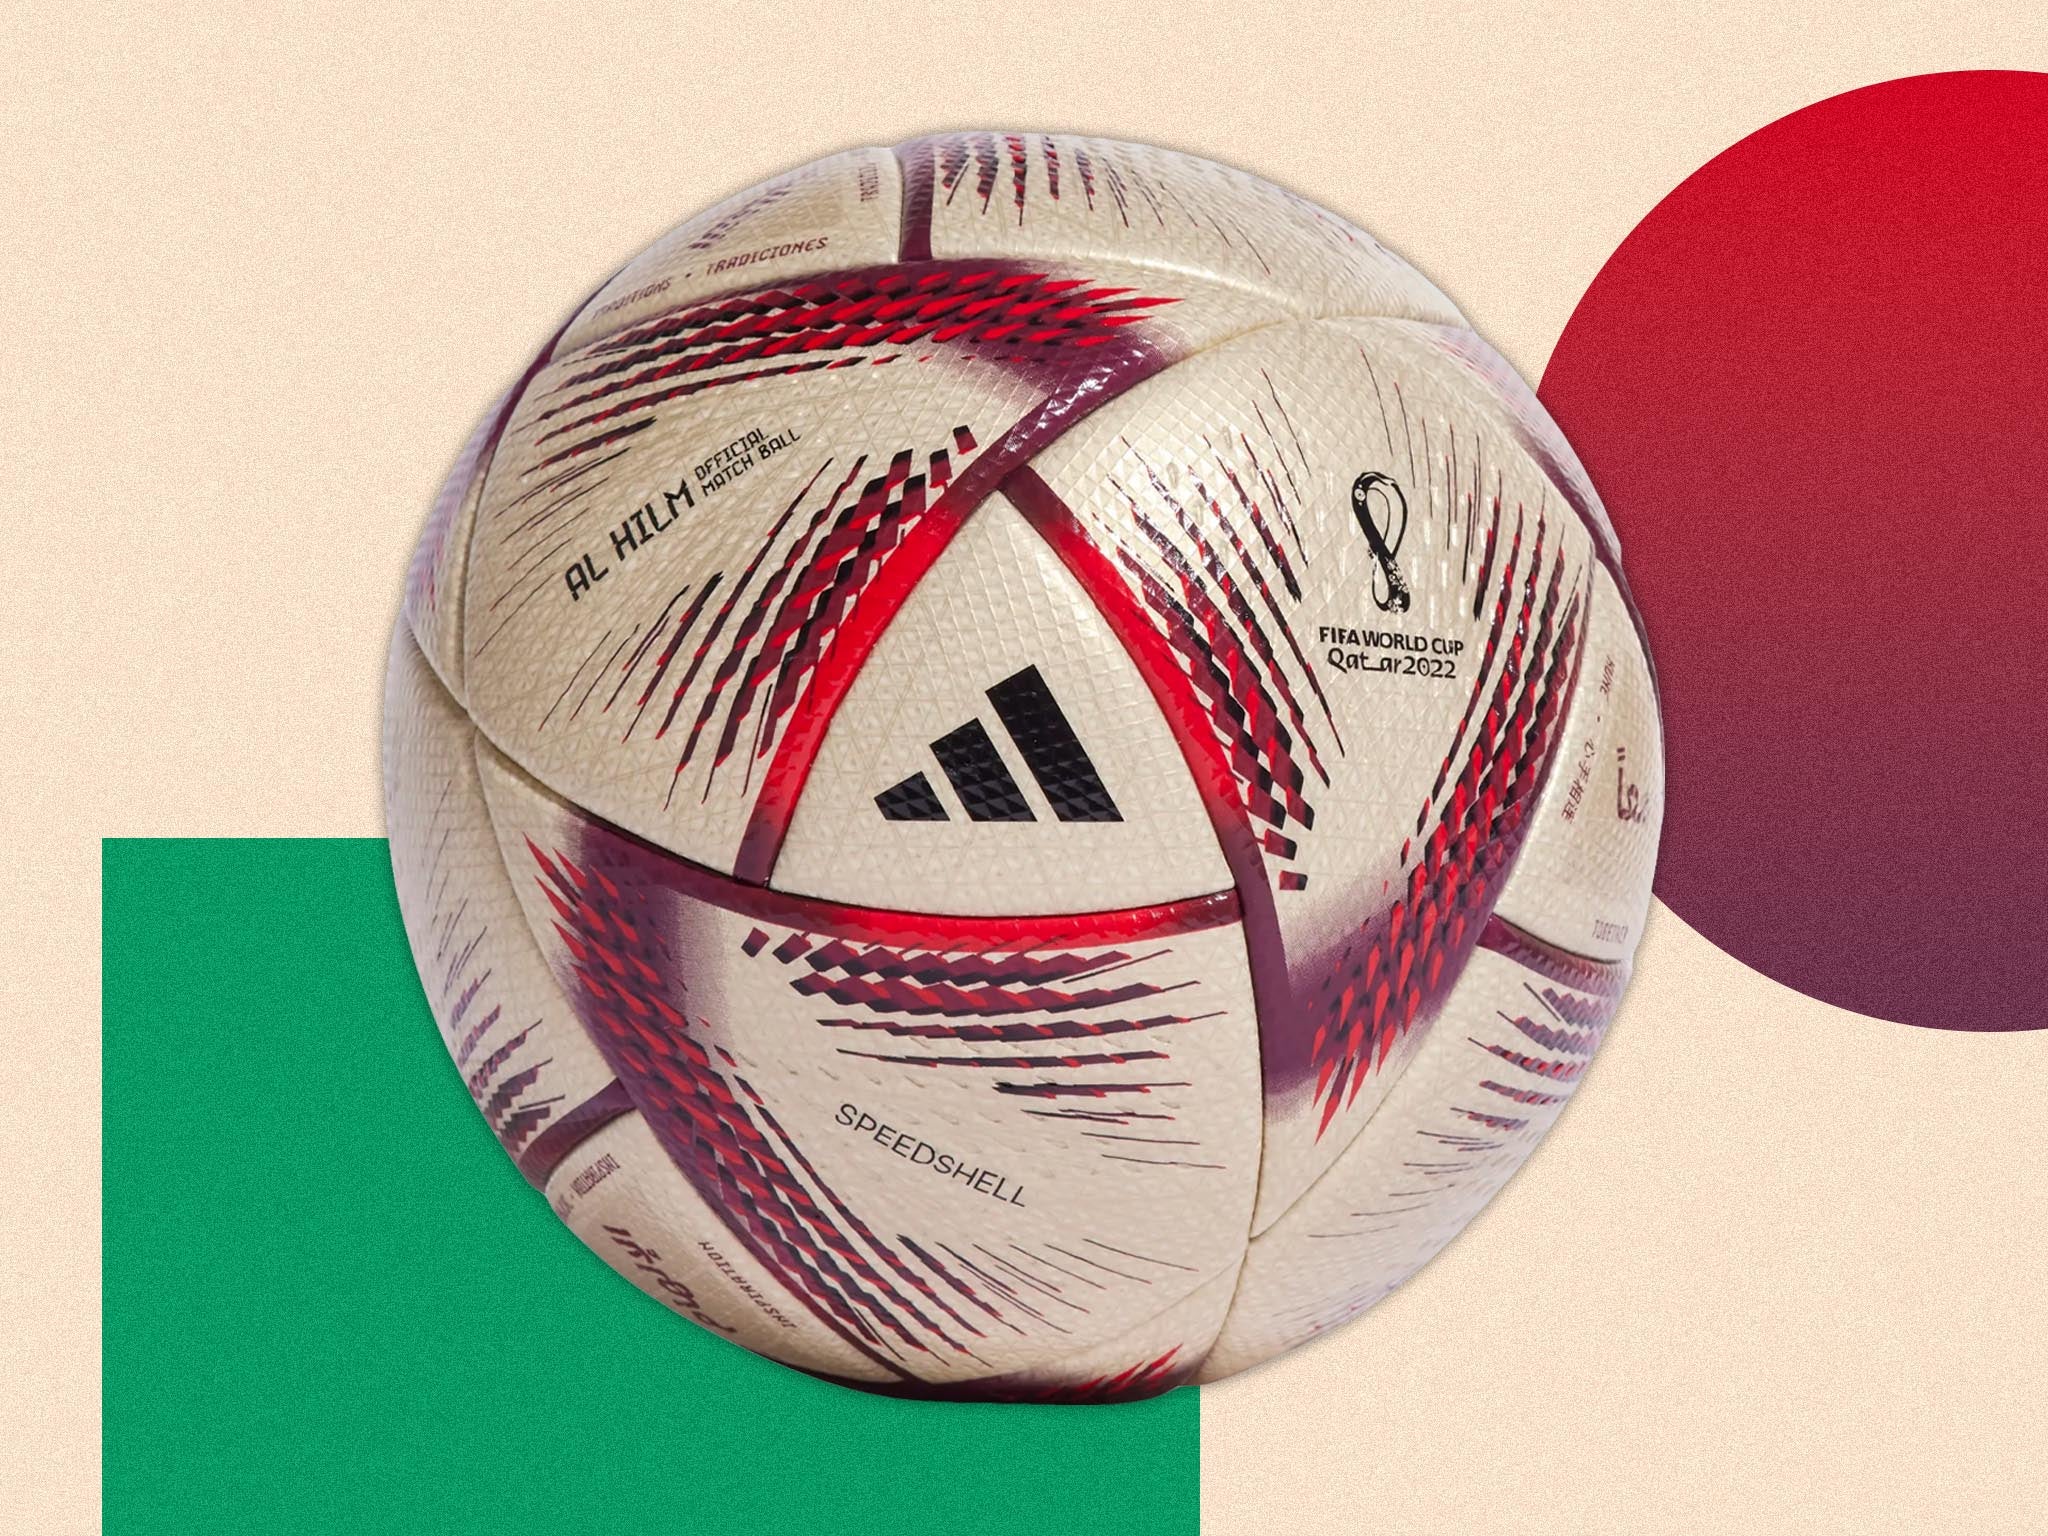 World Cup gold dream ball 2022: Where to buy the official football